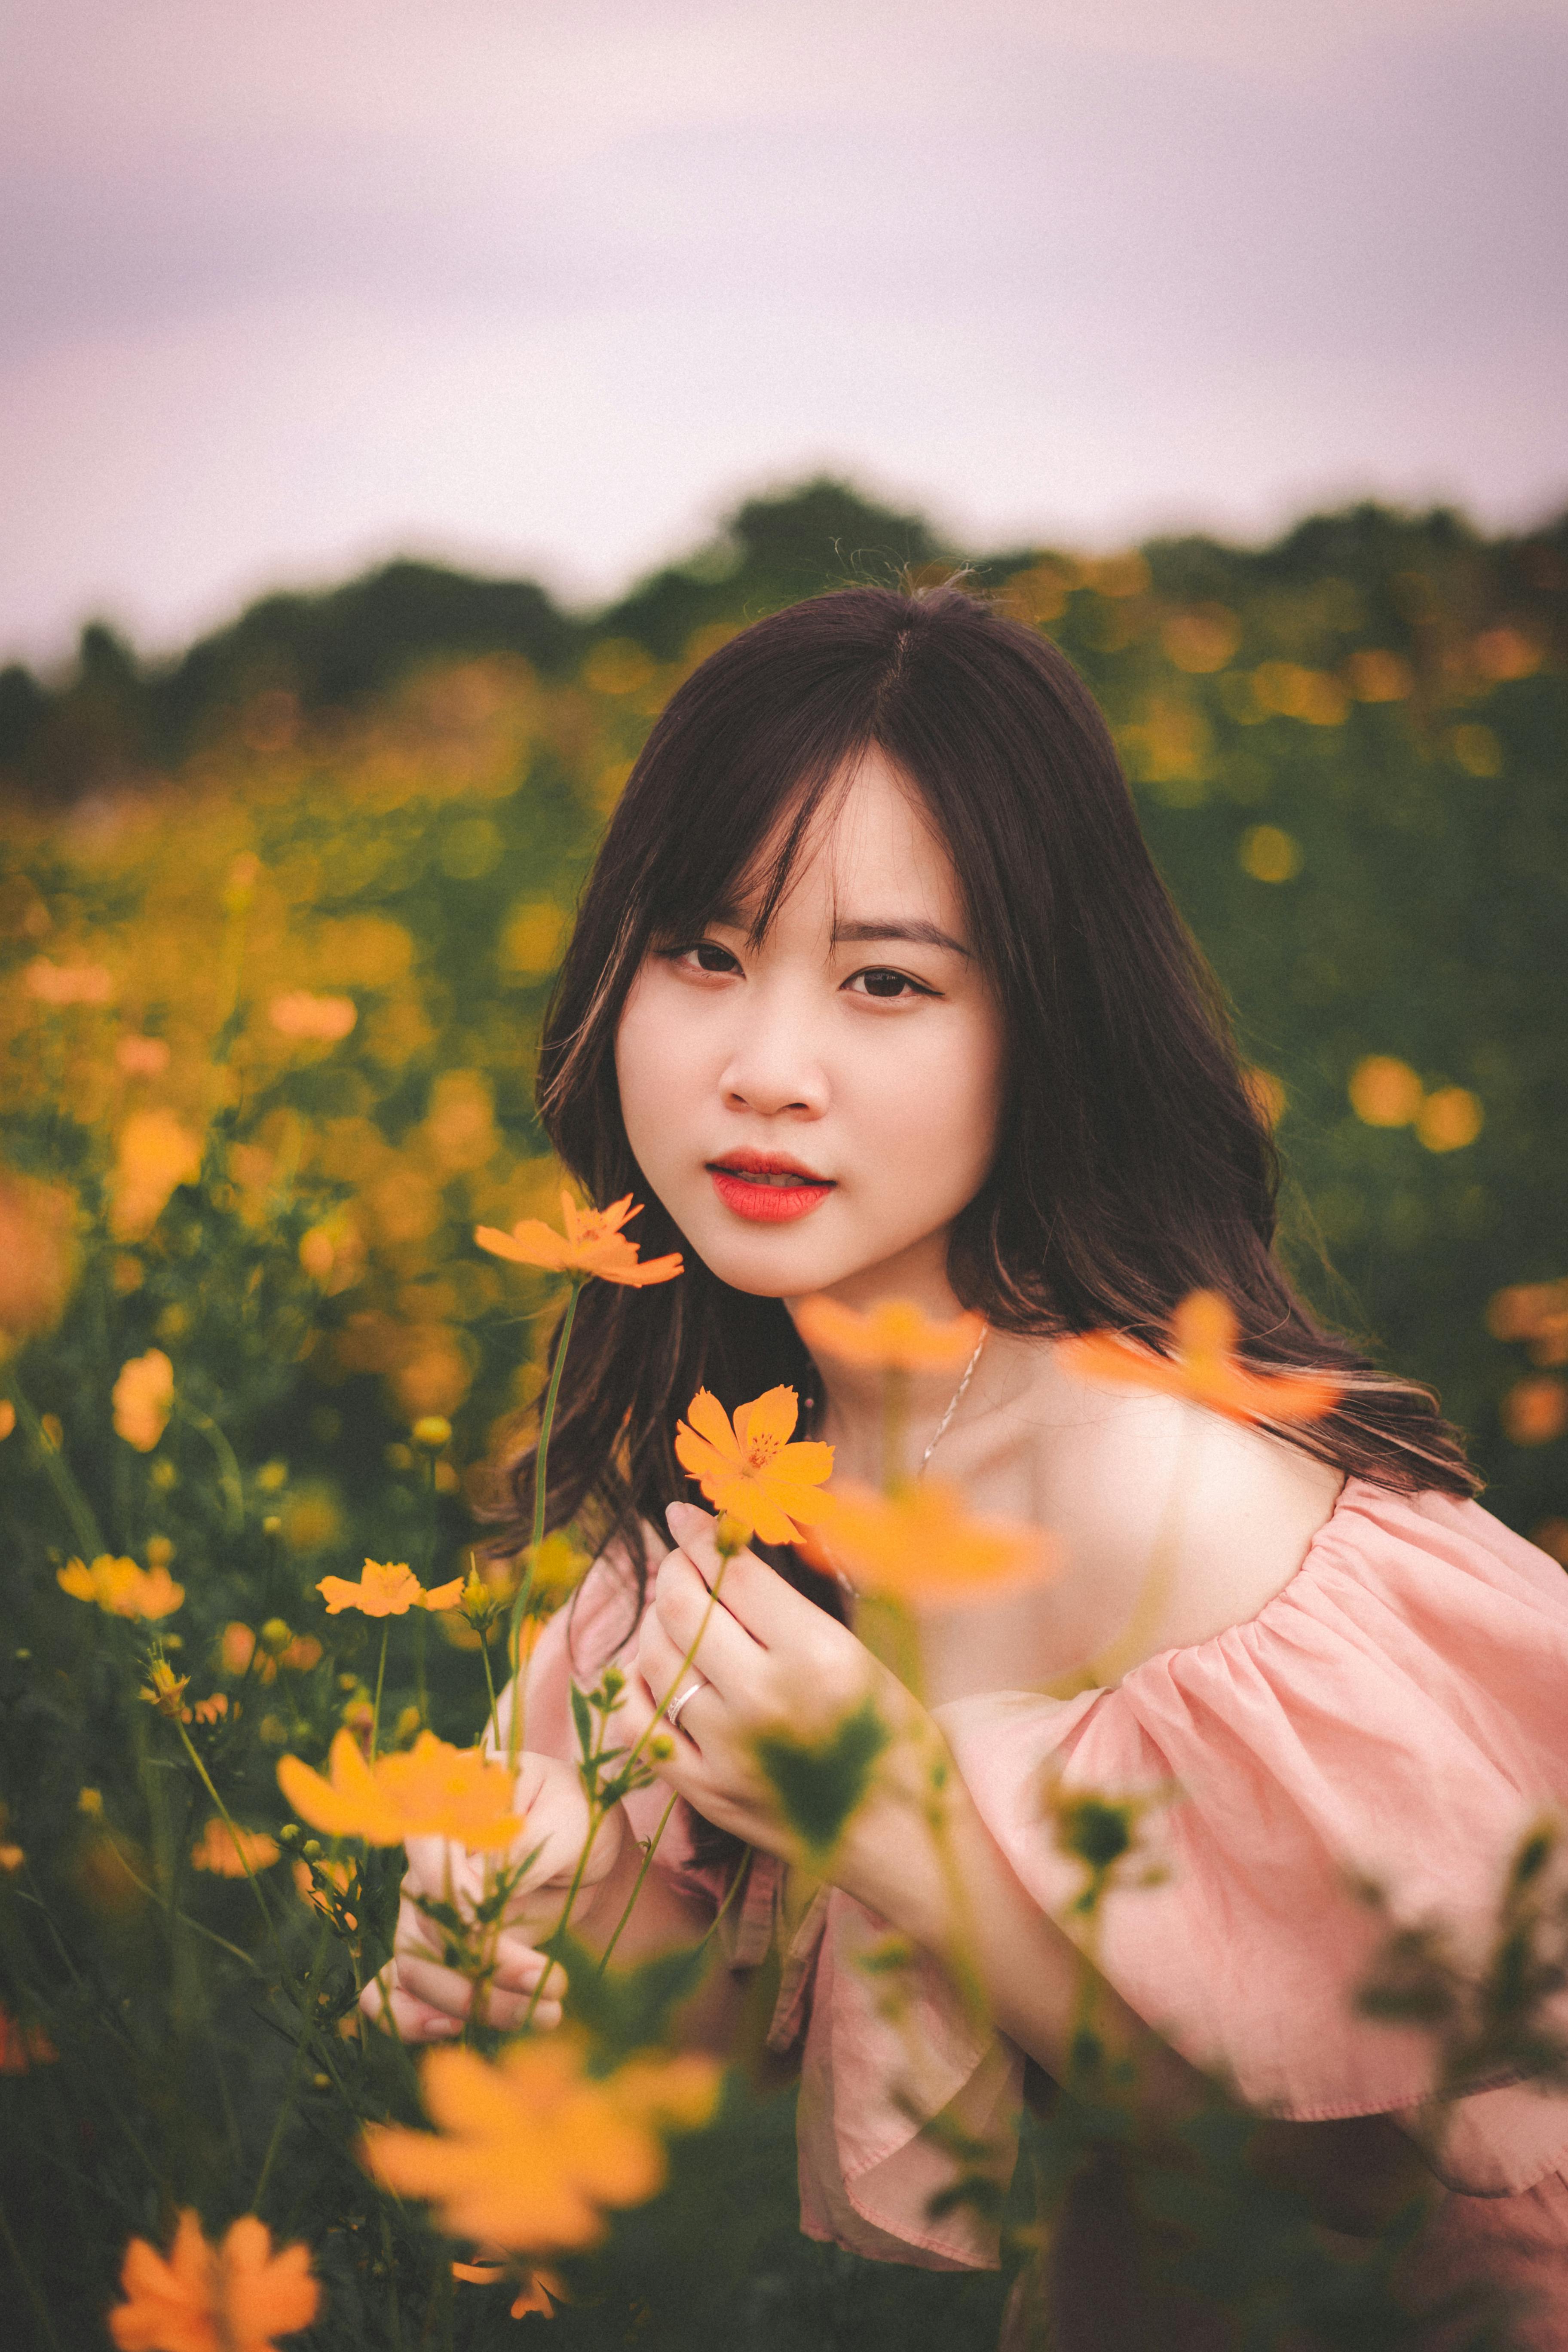 Young Girls' Flower Portrait Photography